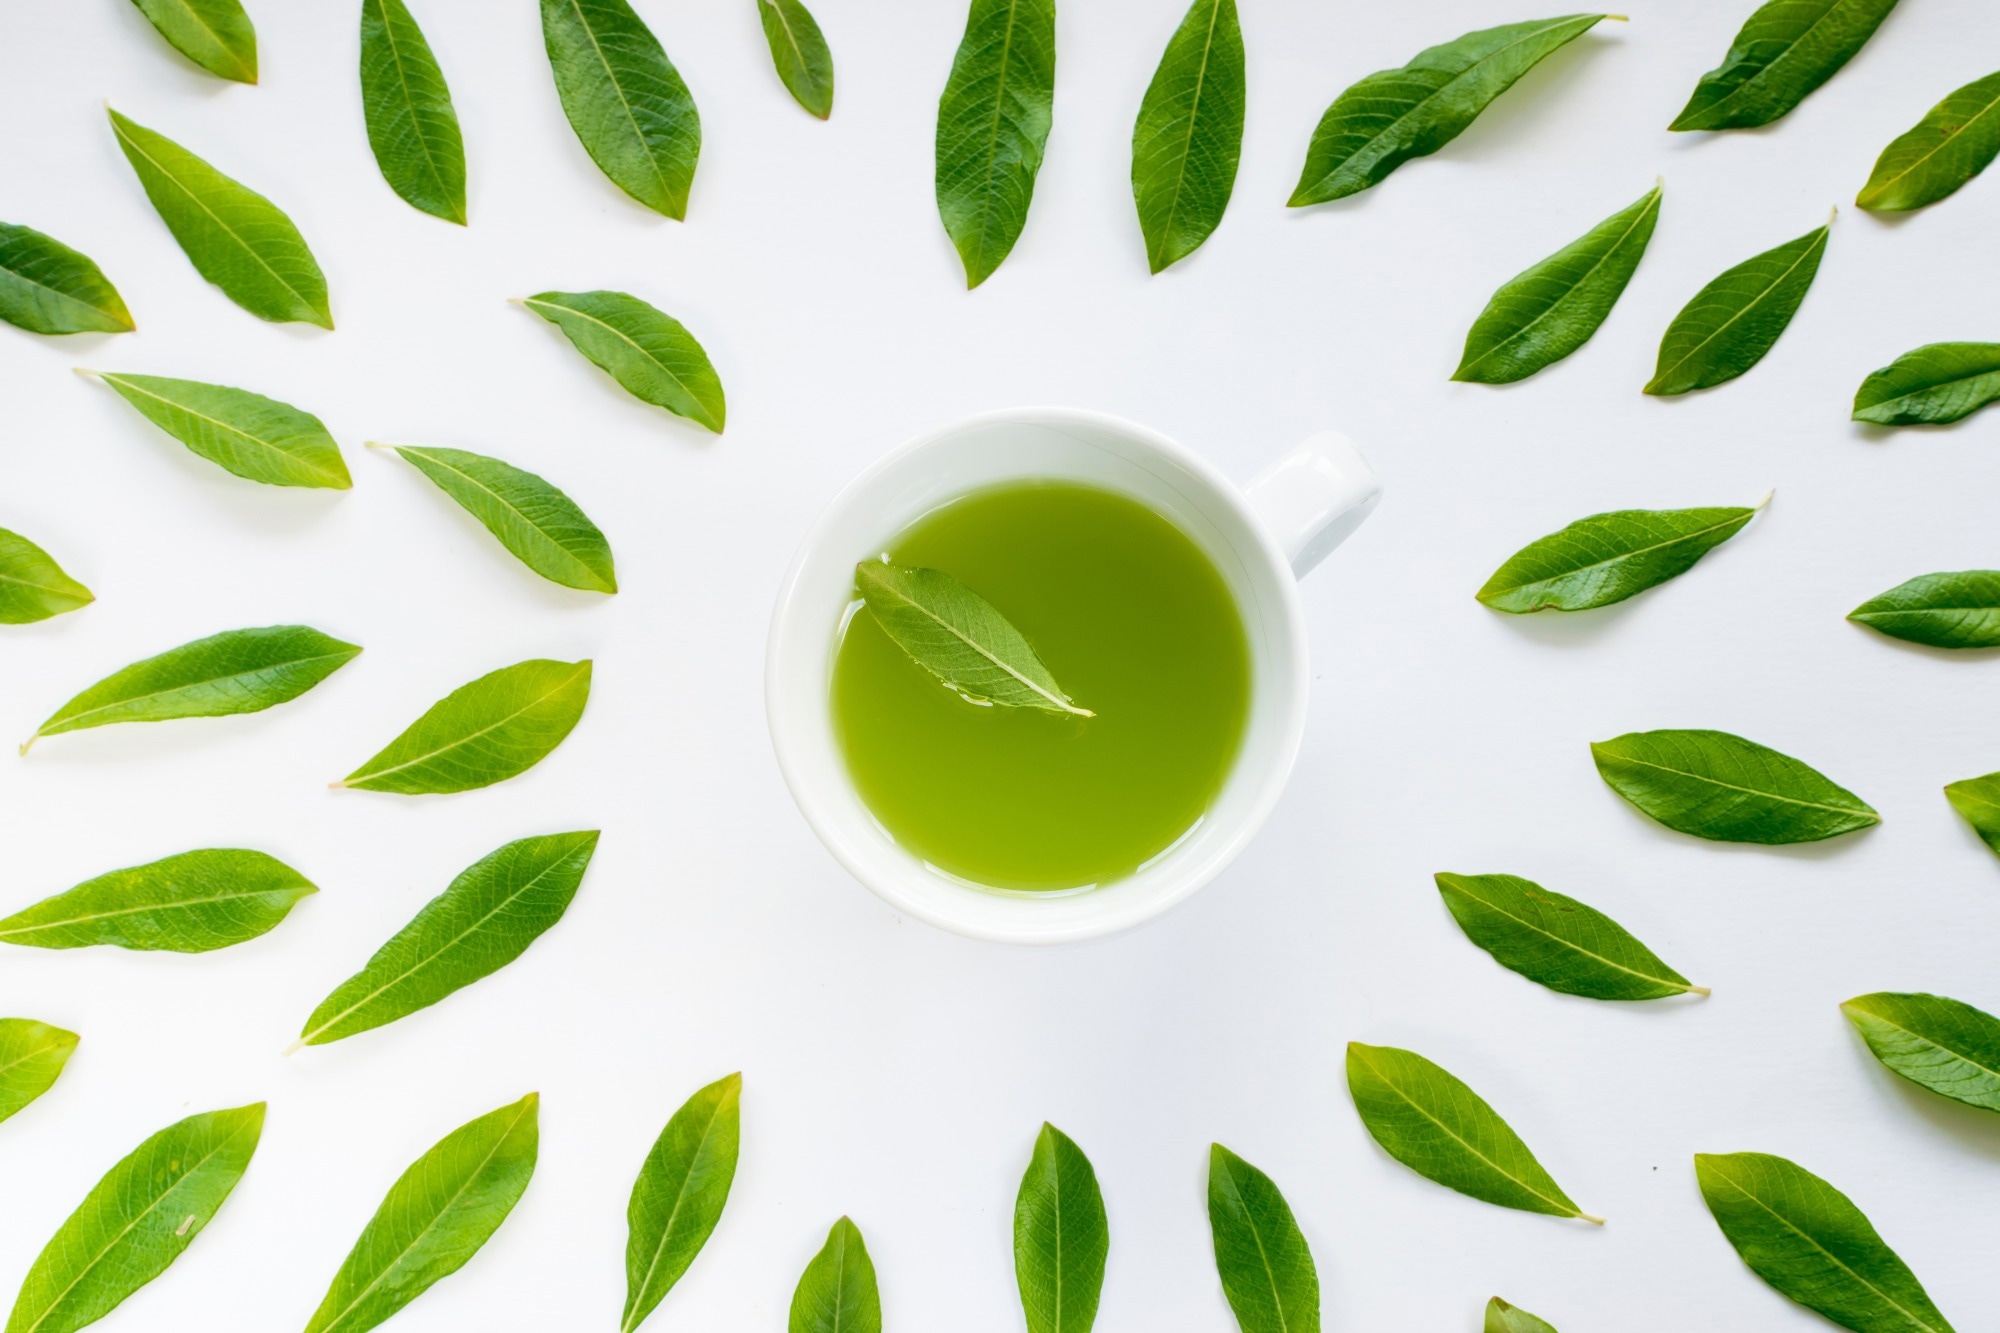 Review: Green Tea and Benign Gynecologic Disorders: A New Trick for An Old Beverage? Image Credit: Ermak Oksana / Shutterstock